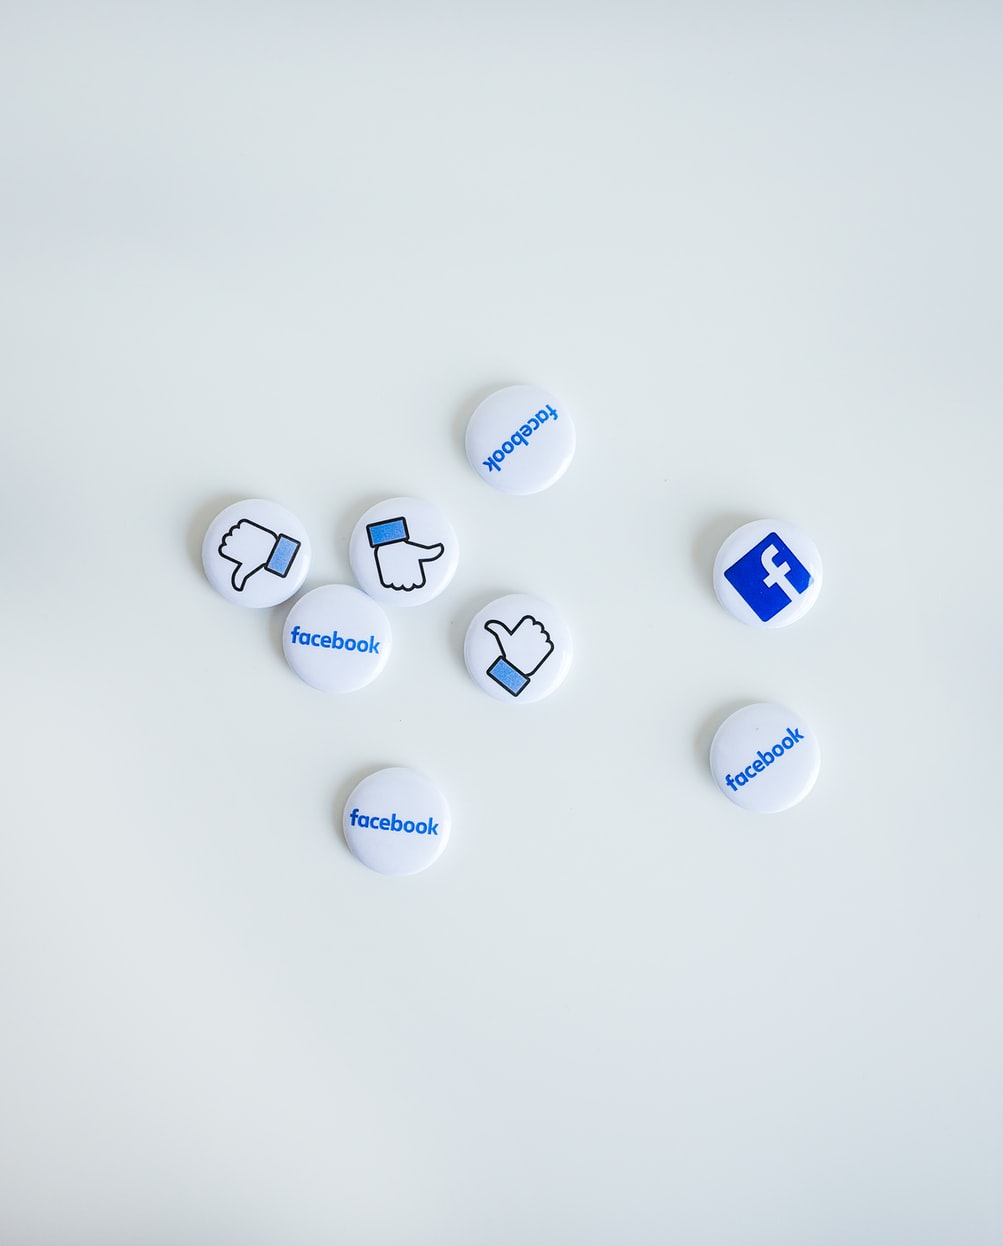 Photo shows buttoms with the facebook logo and thumbs up sign againist a white background